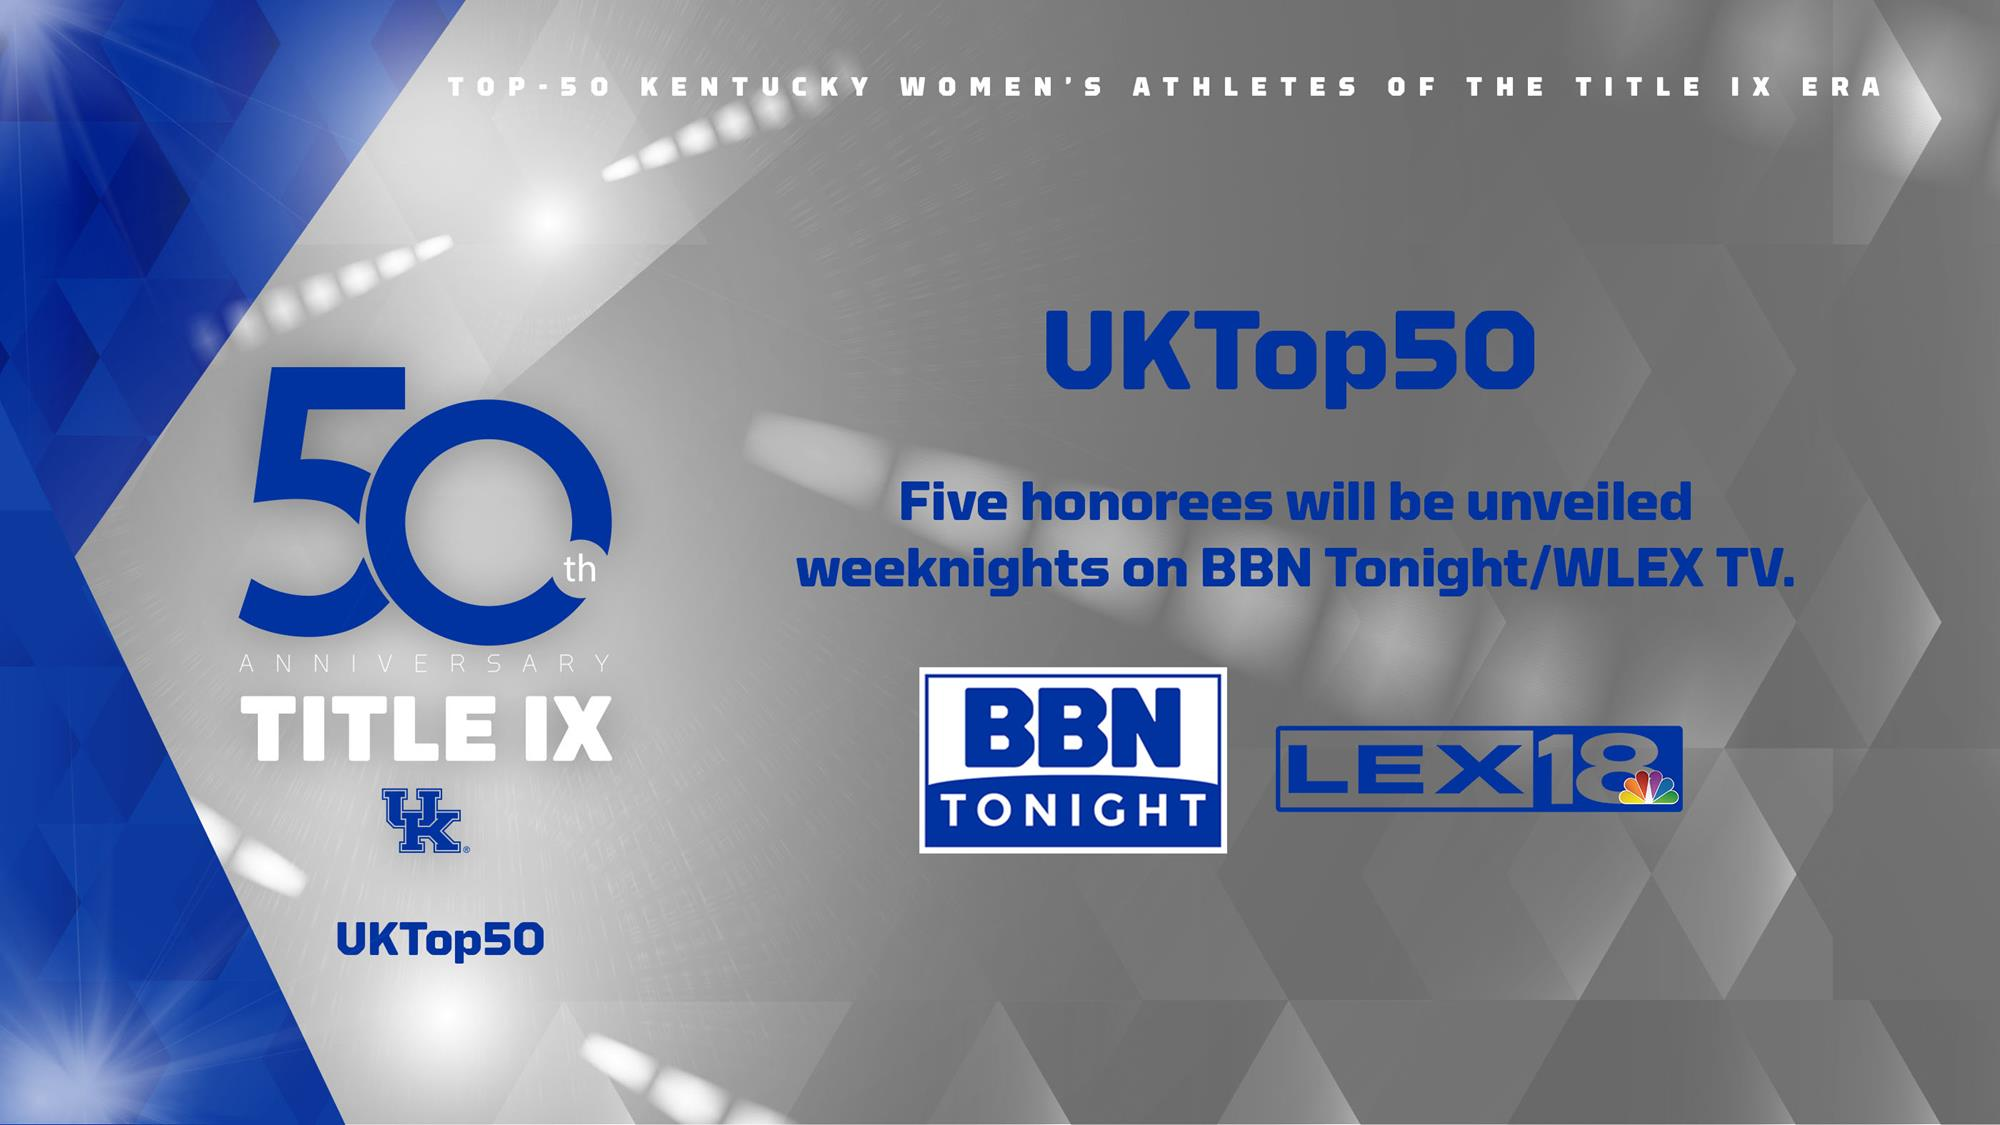 UK Athletics to Unveil Title IX Top 50 in Conjunction with WLEX